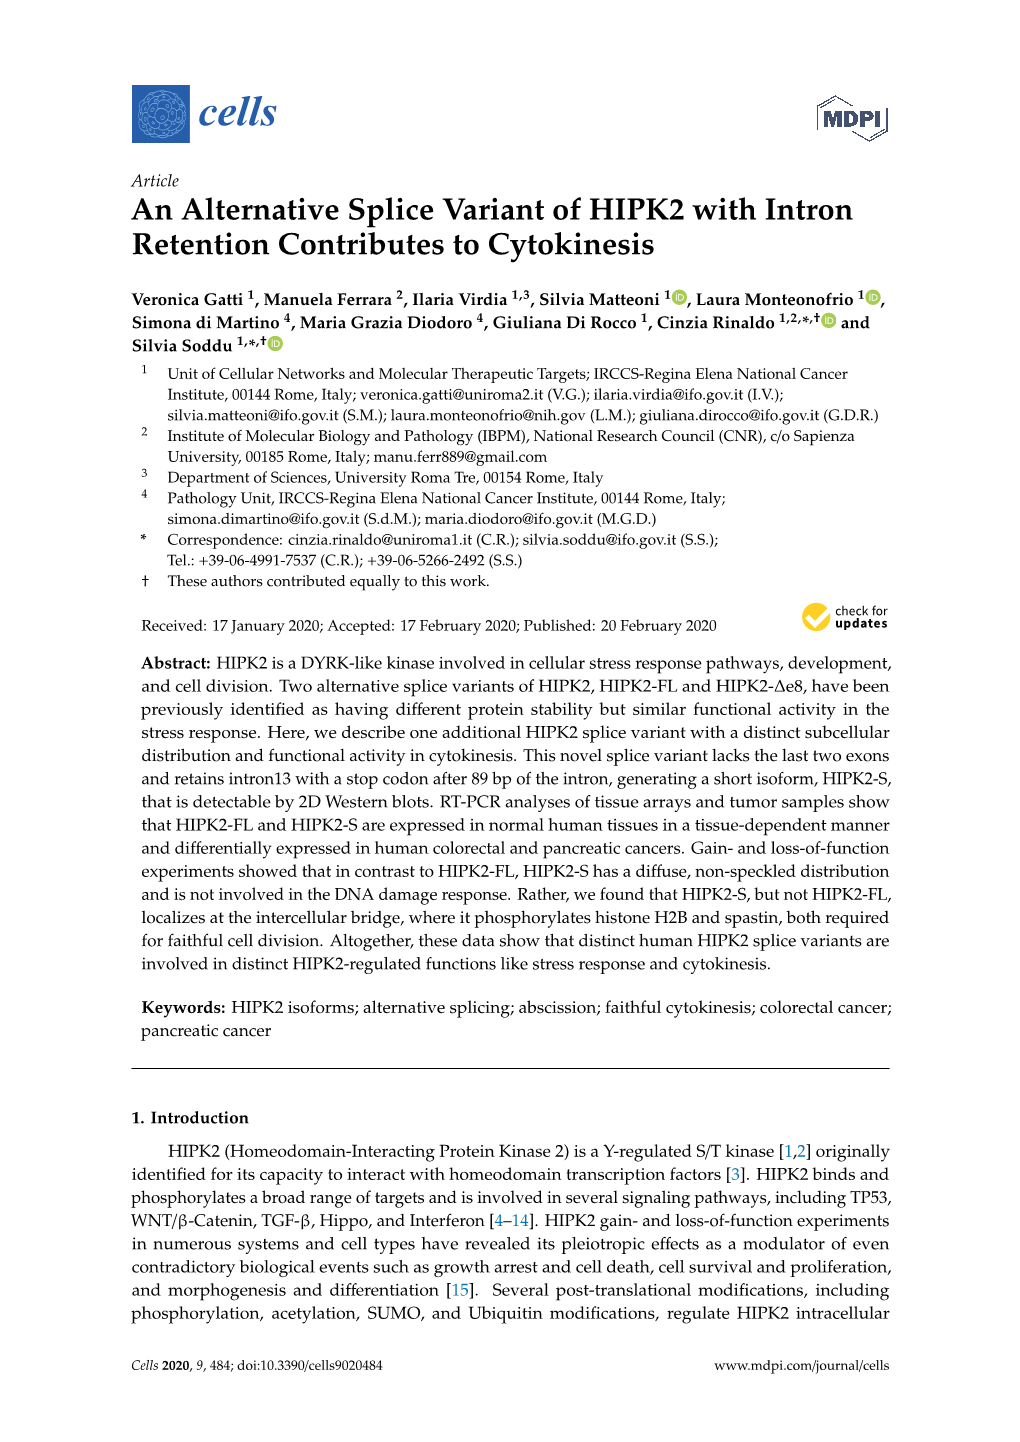 An Alternative Splice Variant of HIPK2 with Intron Retention Contributes to Cytokinesis